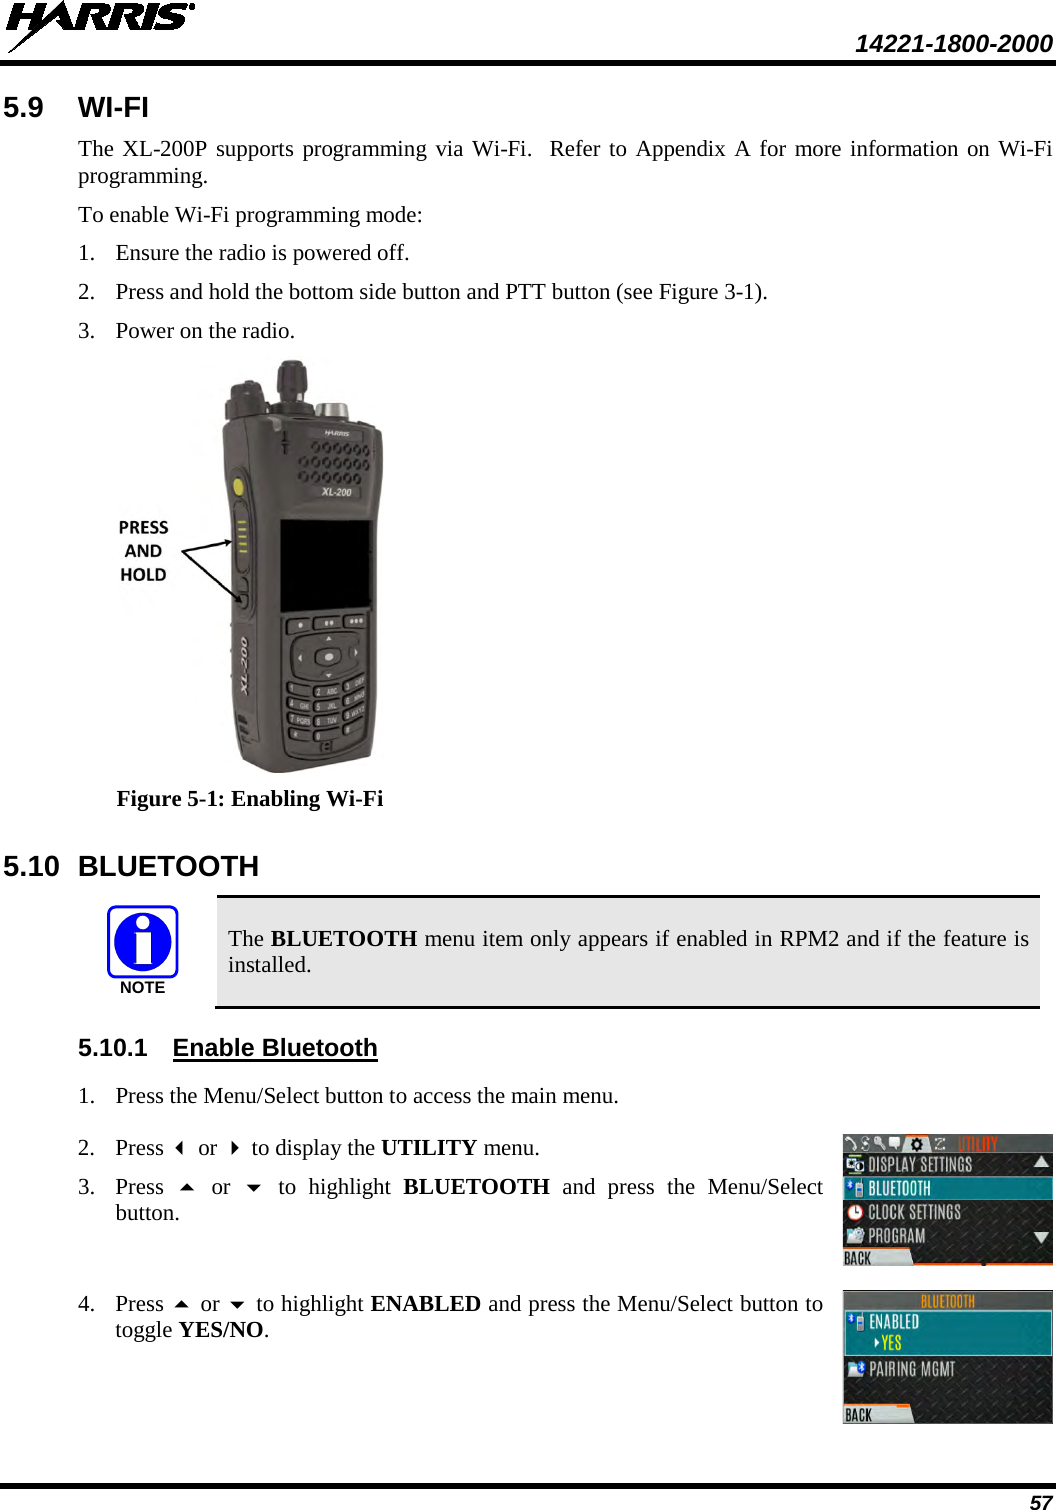  14221-1800-2000 57 5.9 WI-FI  The XL-200P supports programming via Wi-Fi.  Refer to Appendix A for more information on Wi-Fi programming. To enable Wi-Fi programming mode: 1. Ensure the radio is powered off. 2. Press and hold the bottom side button and PTT button (see Figure 3-1). 3. Power on the radio.  Figure 5-1: Enabling Wi-Fi 5.10 BLUETOOTH  The BLUETOOTH menu item only appears if enabled in RPM2 and if the feature is installed. 5.10.1 Enable Bluetooth 1. Press the Menu/Select button to access the main menu.   2. Press  or  to display the UTILITY menu. 3. Press   or   to highlight BLUETOOTH and press the Menu/Select button.  4. Press  or  to highlight ENABLED and press the Menu/Select button to toggle YES/NO.  NOTE